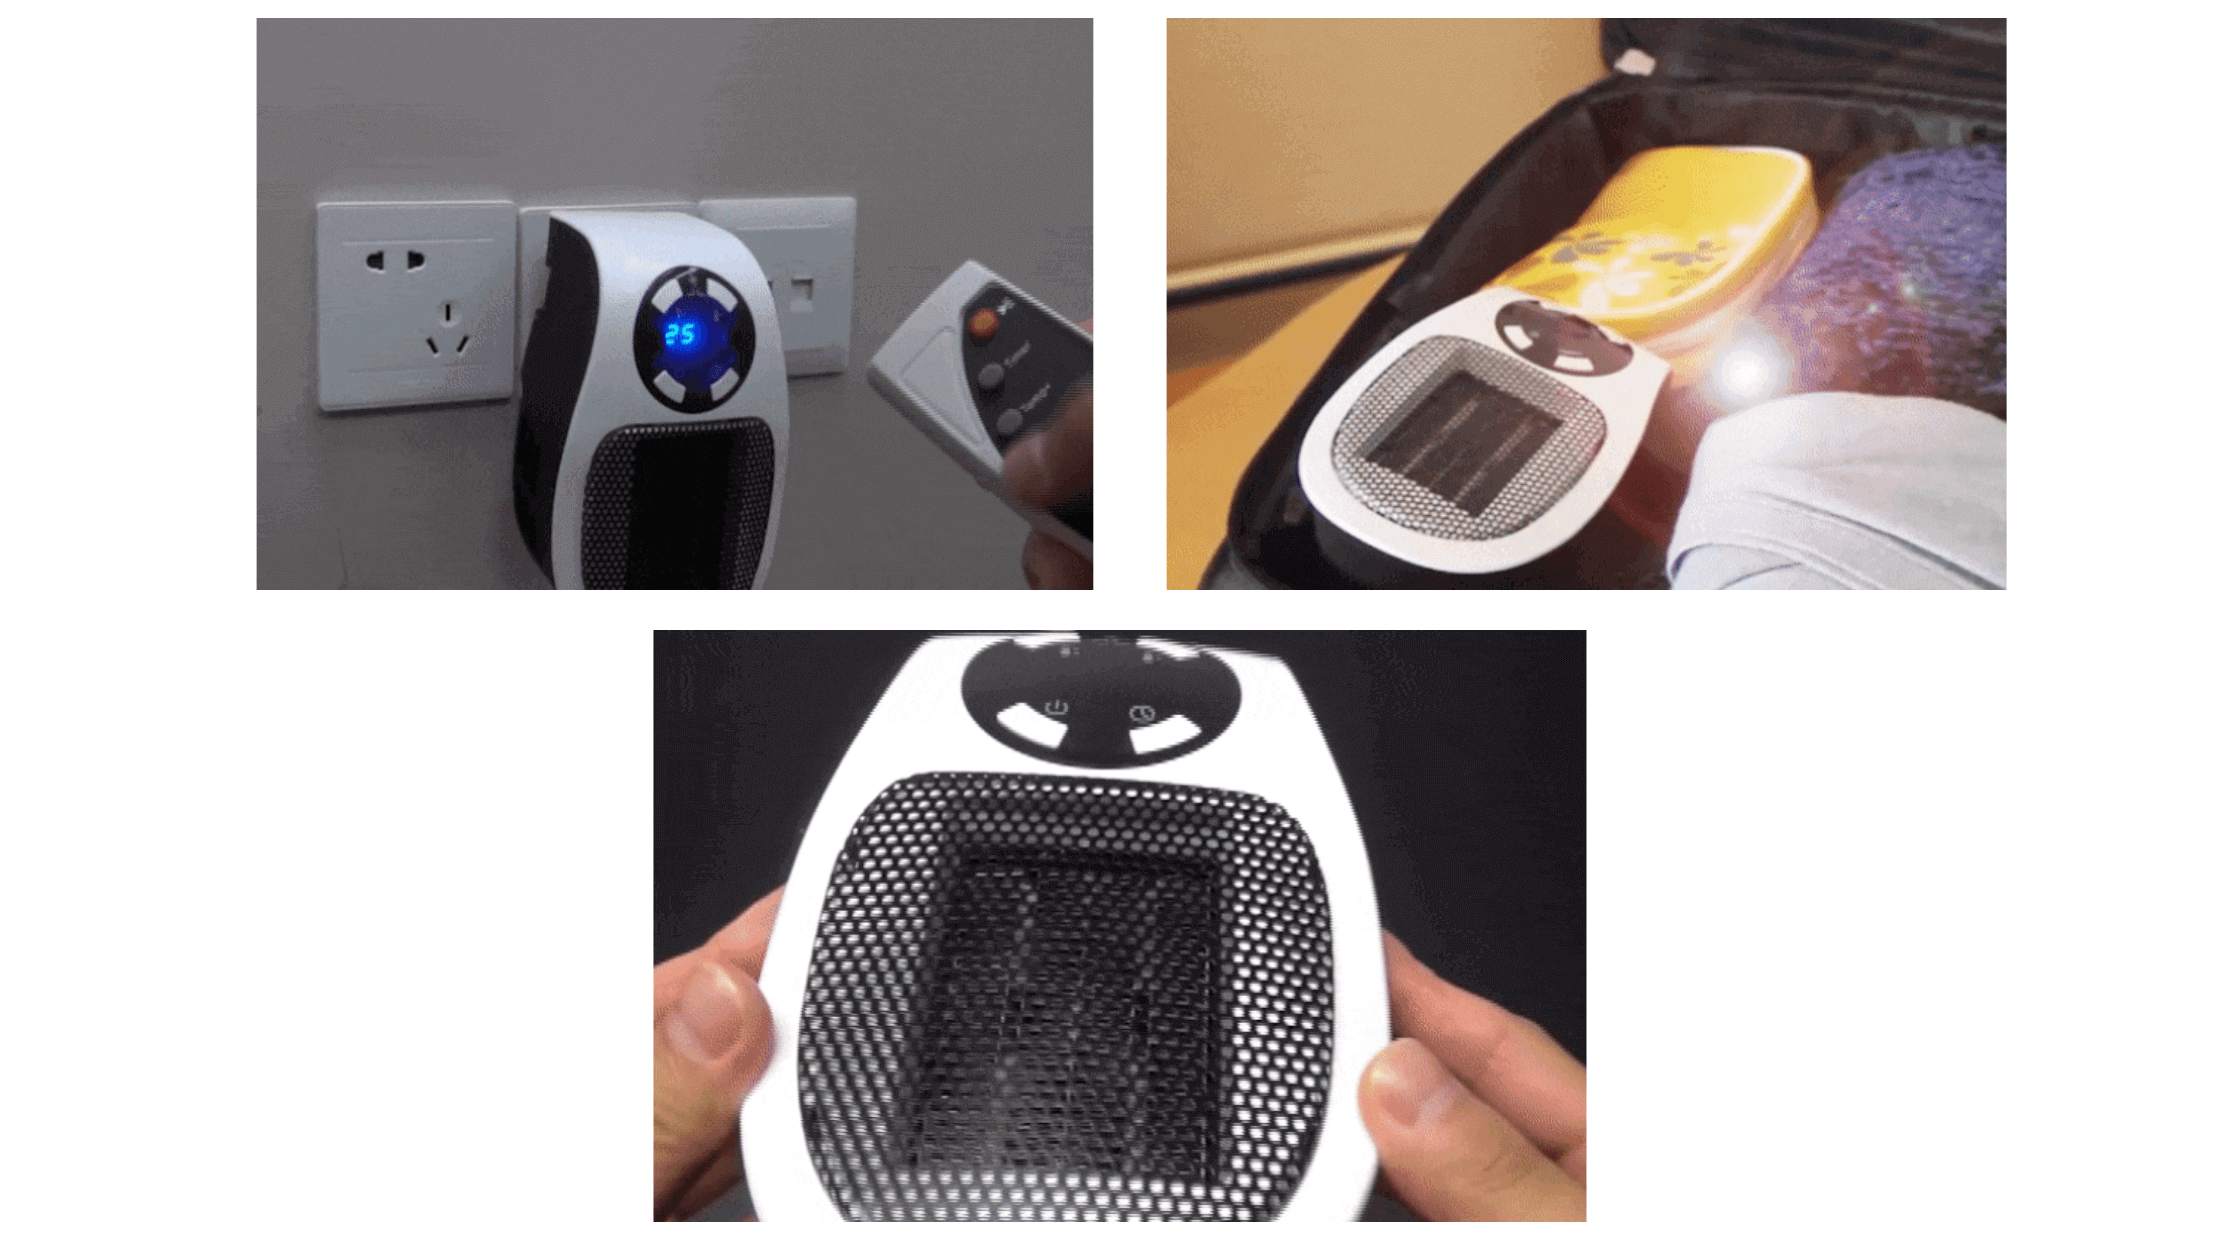 Heater Pro X Reviews: UK hoax alert and must read about customer review